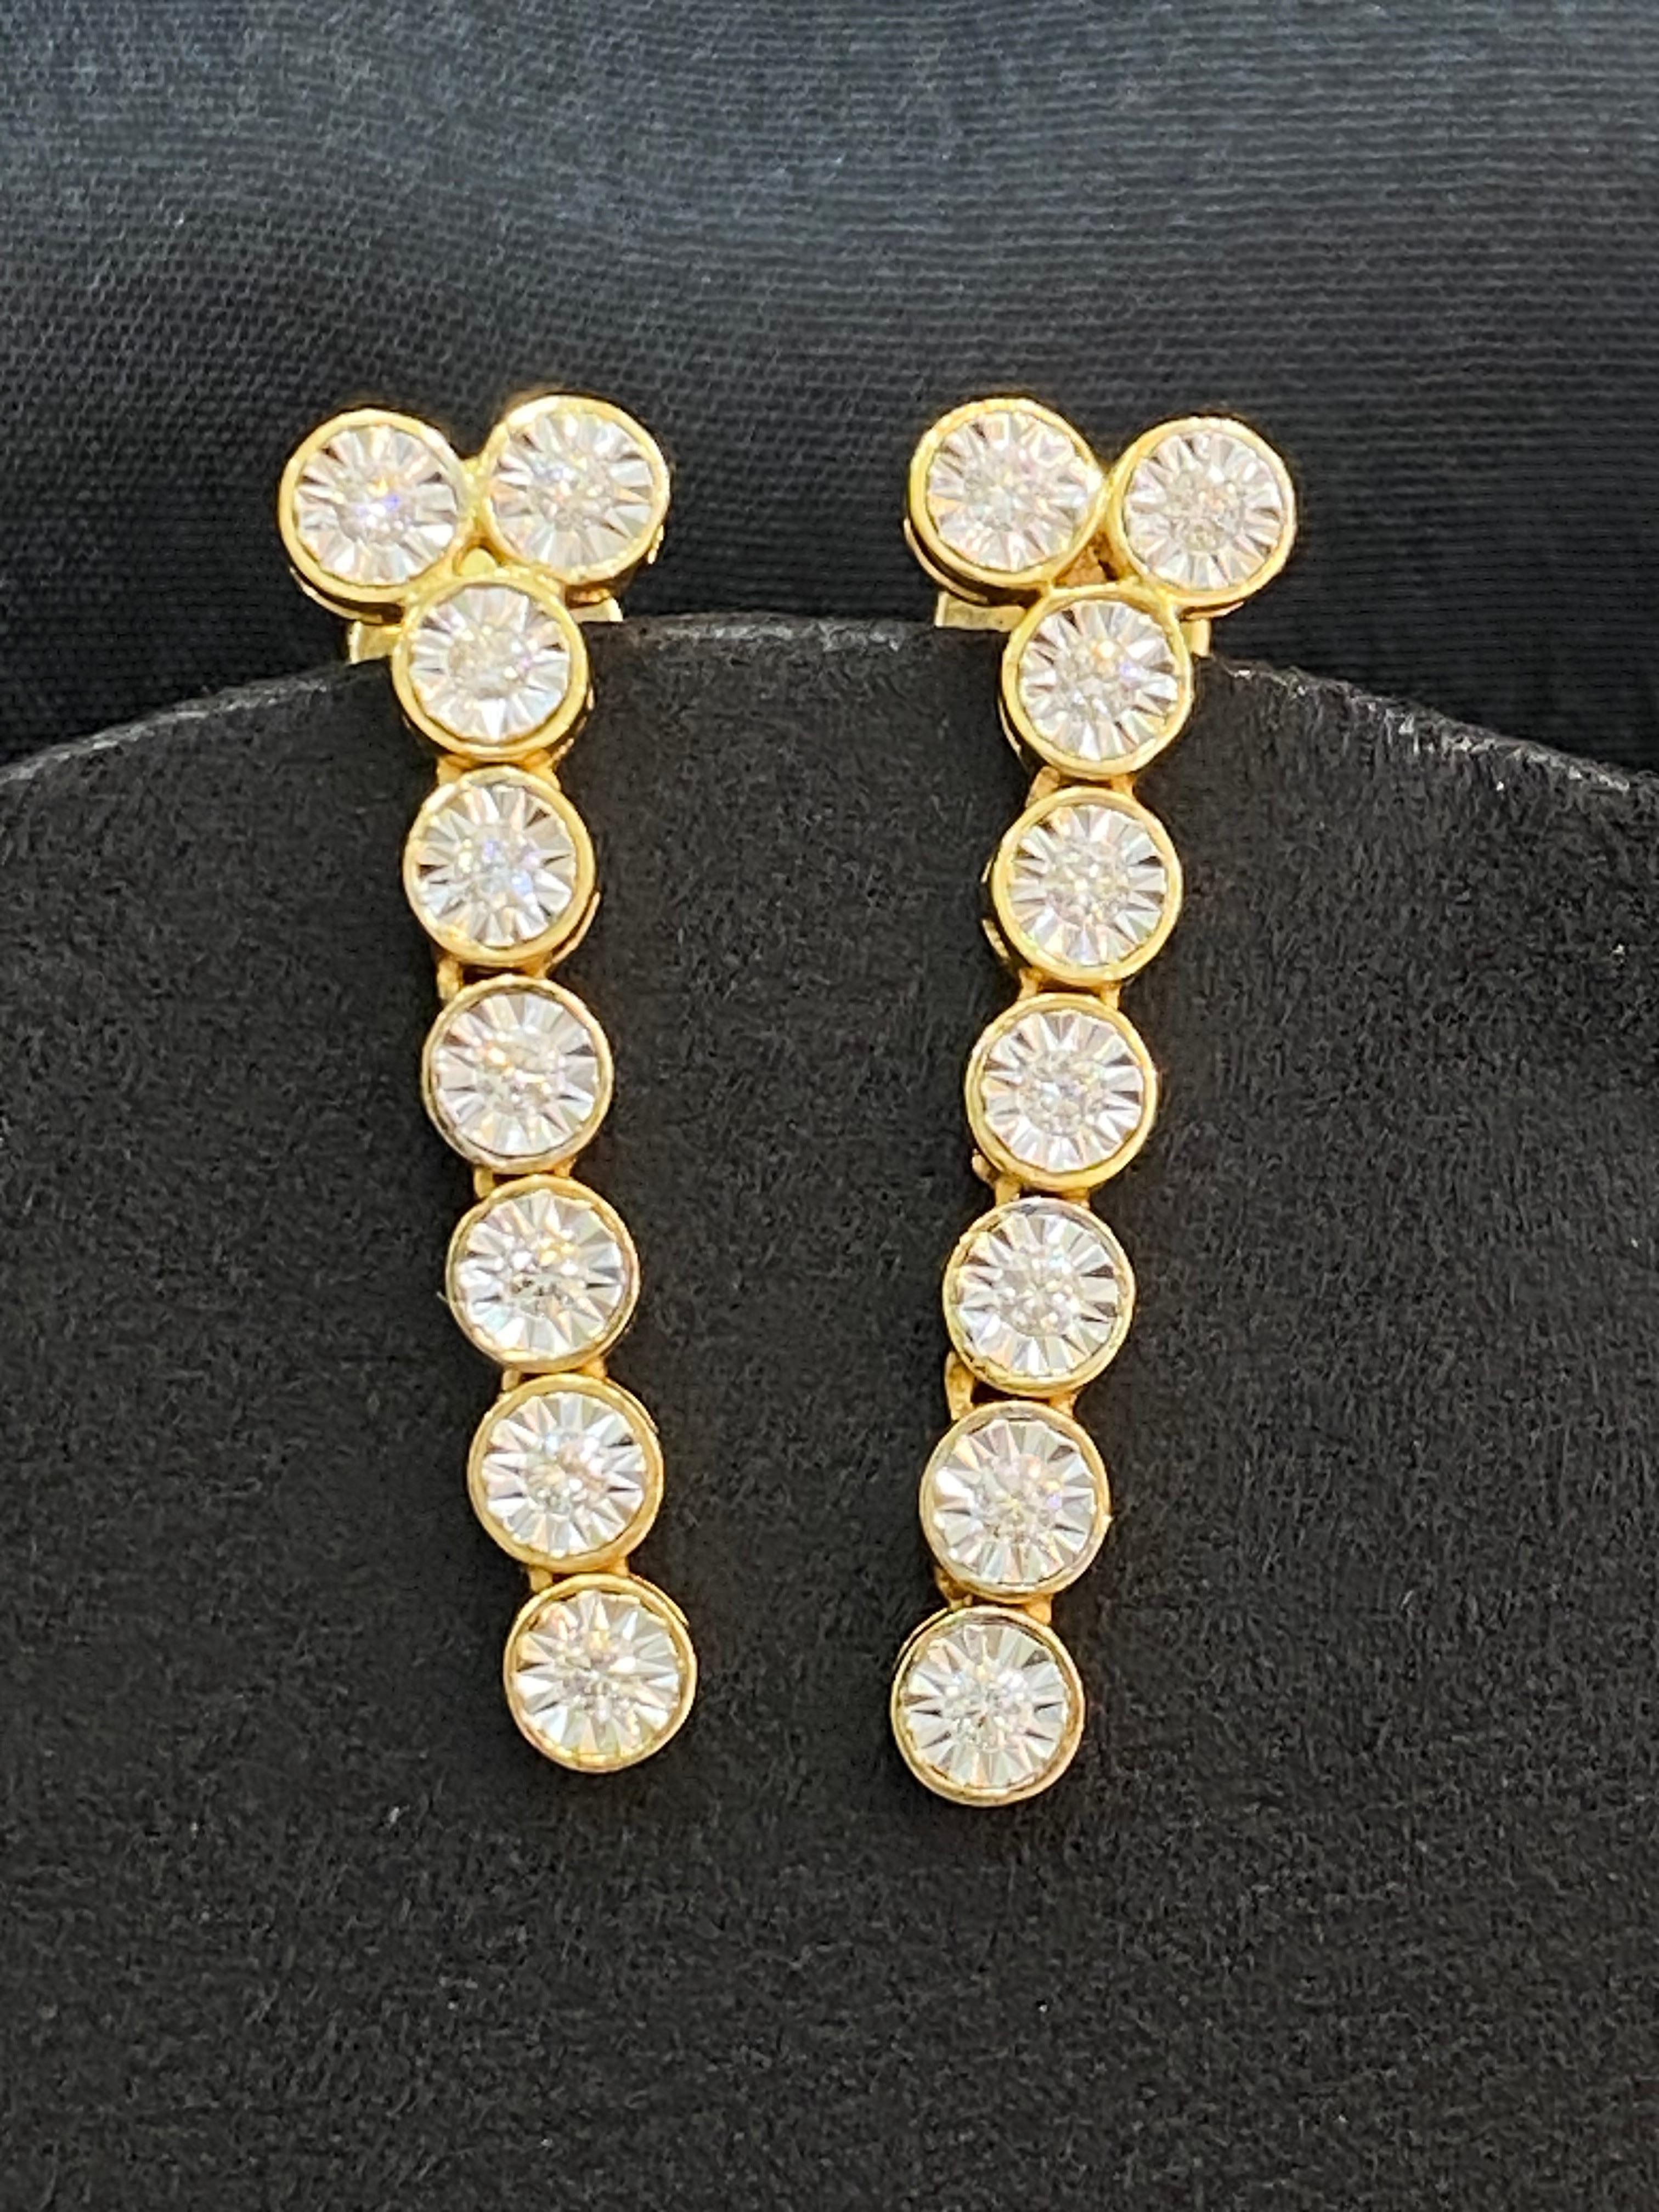 Treat yourself to elegance with this breathtaking jewelry piece. Adorn your ears with these exquisite dangle earrings, adorned with 0.40 carats of dazzling diamonds, set in luxurious 14-carat yellow gold.

Specifications : 

Diamond Color :